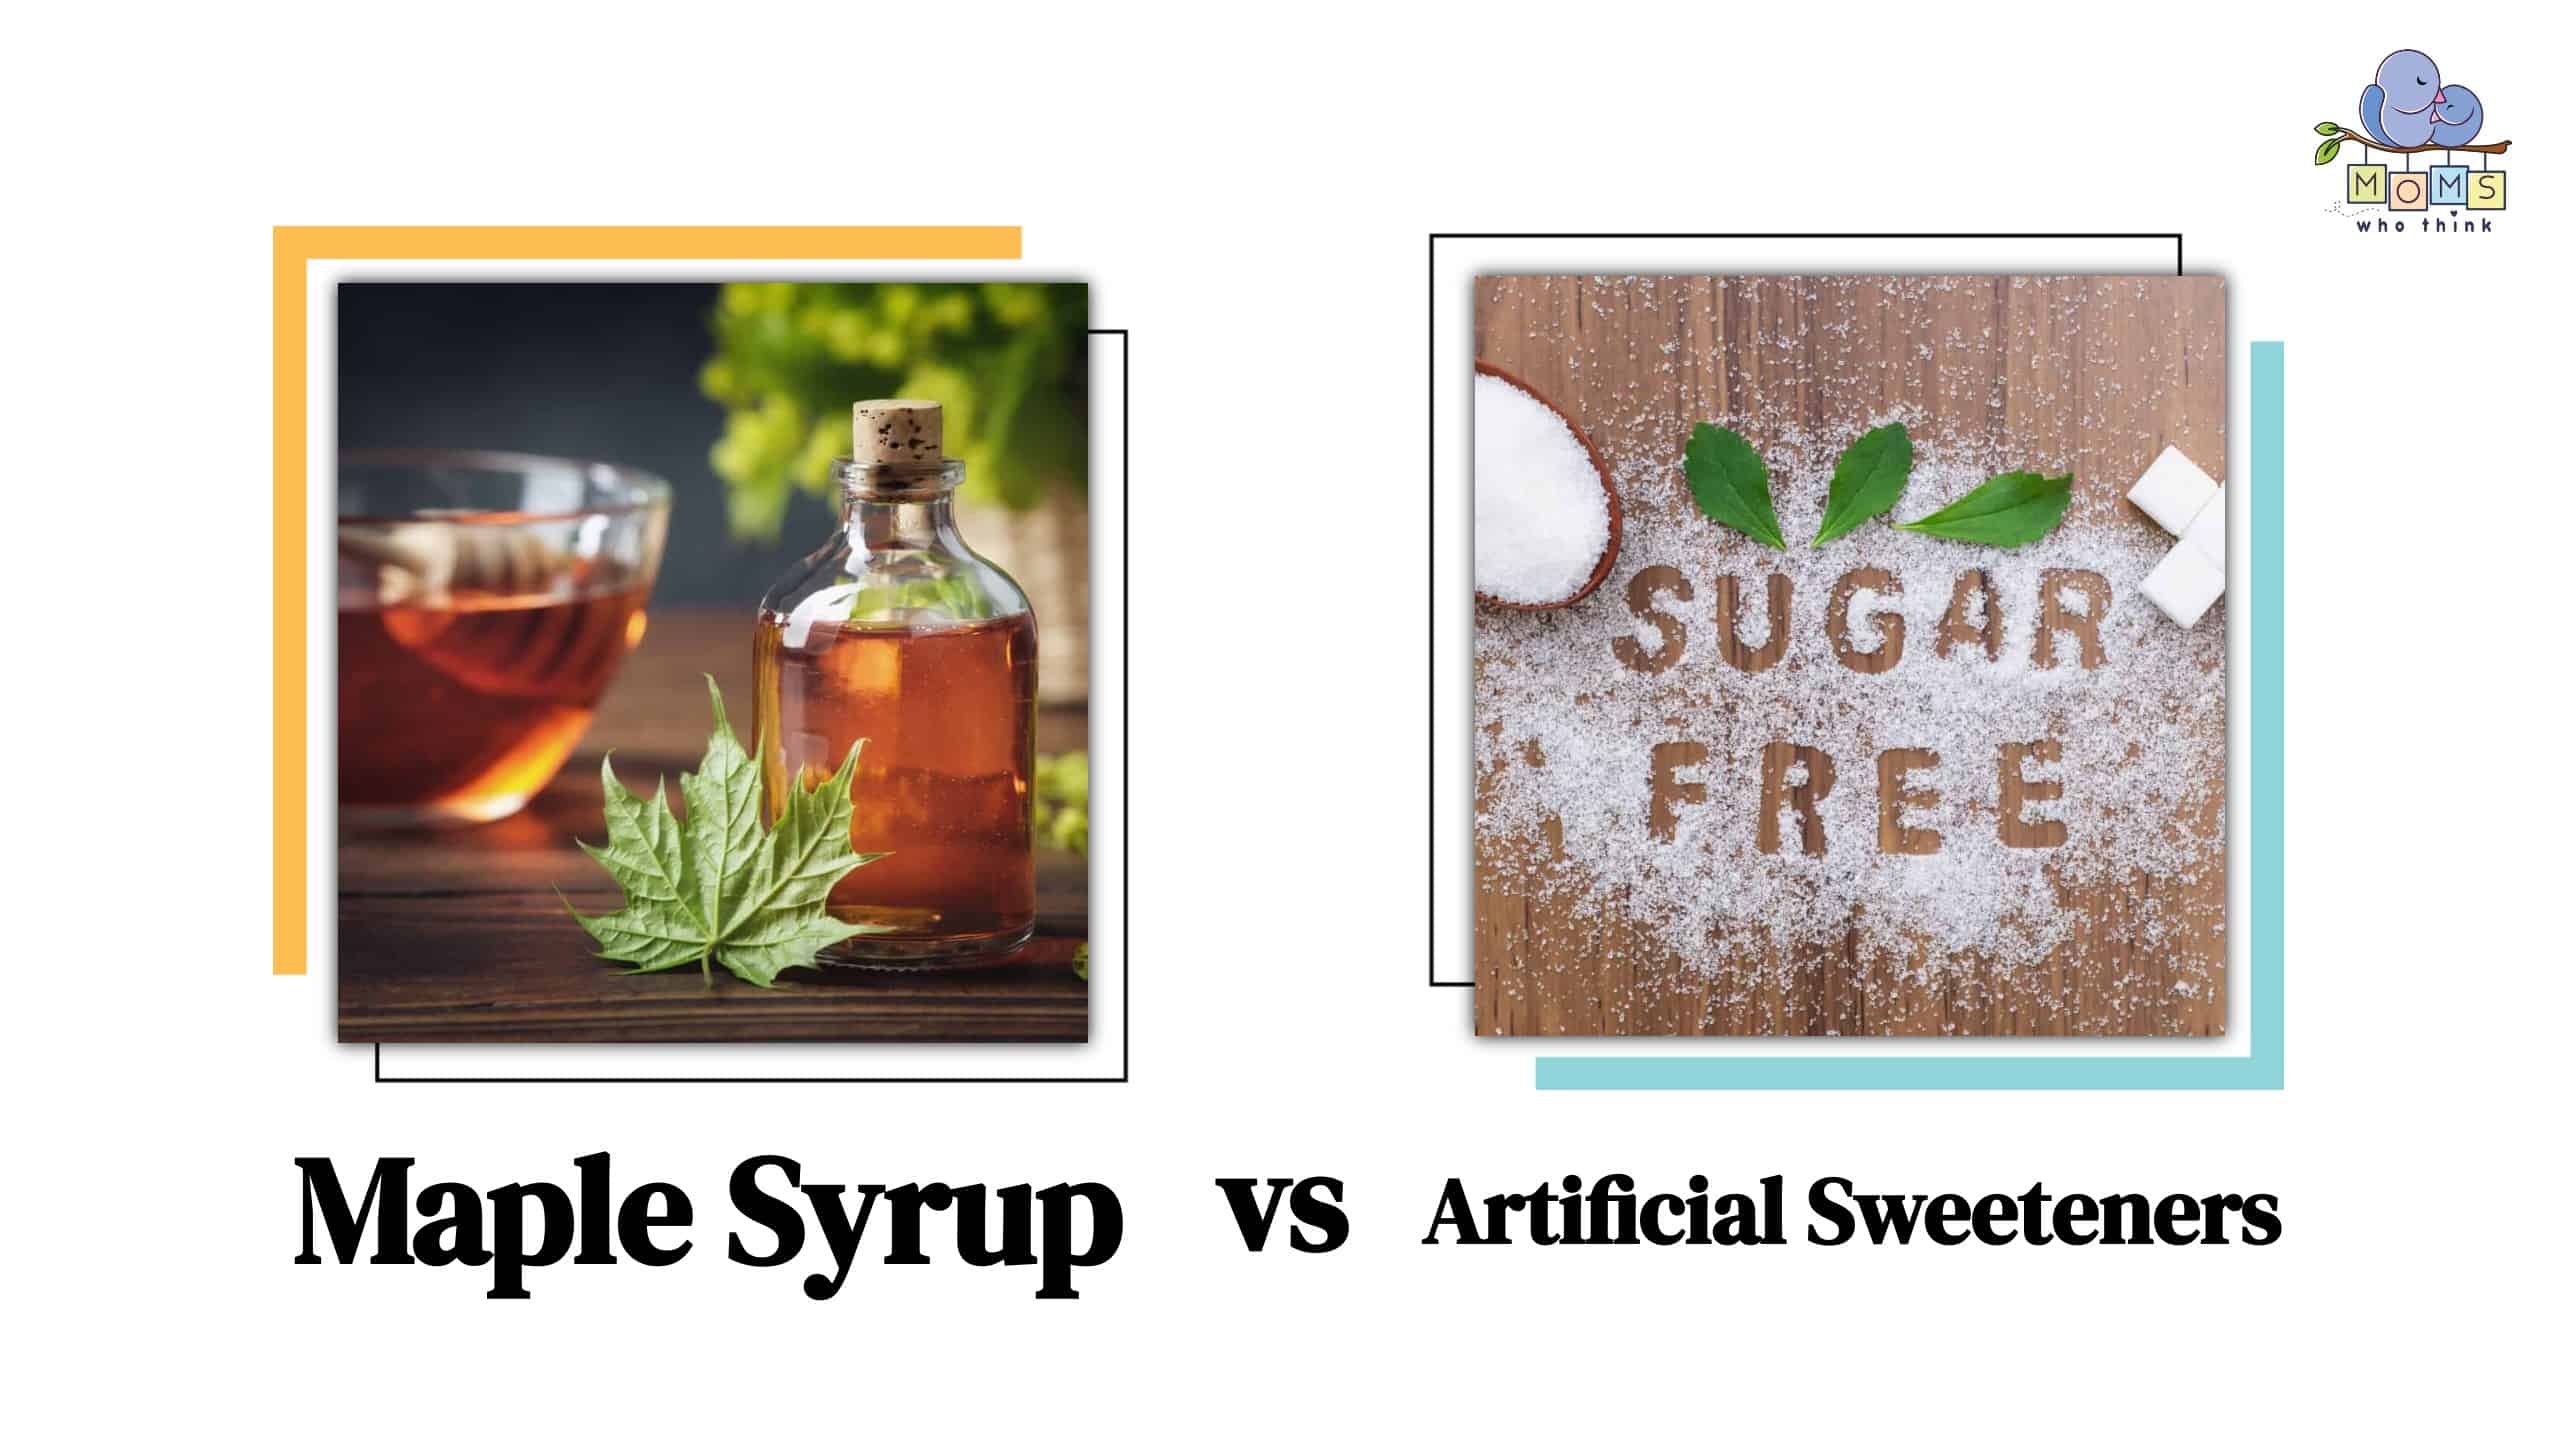 Maple Syrup vs Artificial Sweeteners